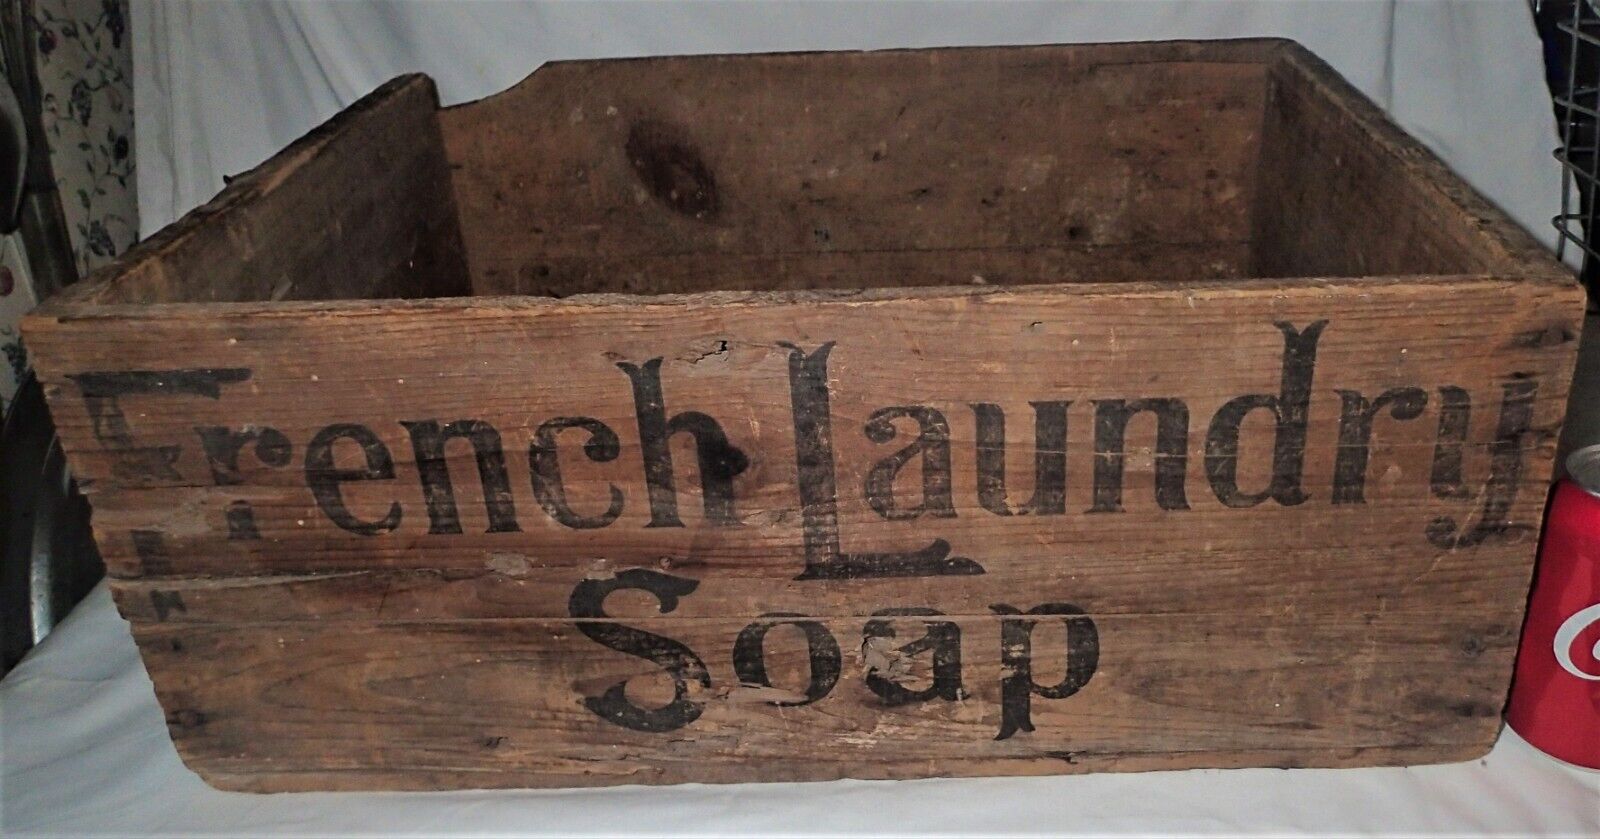 ANTIQUE SOAPINE FRENCH LAUNDRY SOAP PROVIDENCE R.I. U.S.A. KENDALL CO. PRIMITIVE